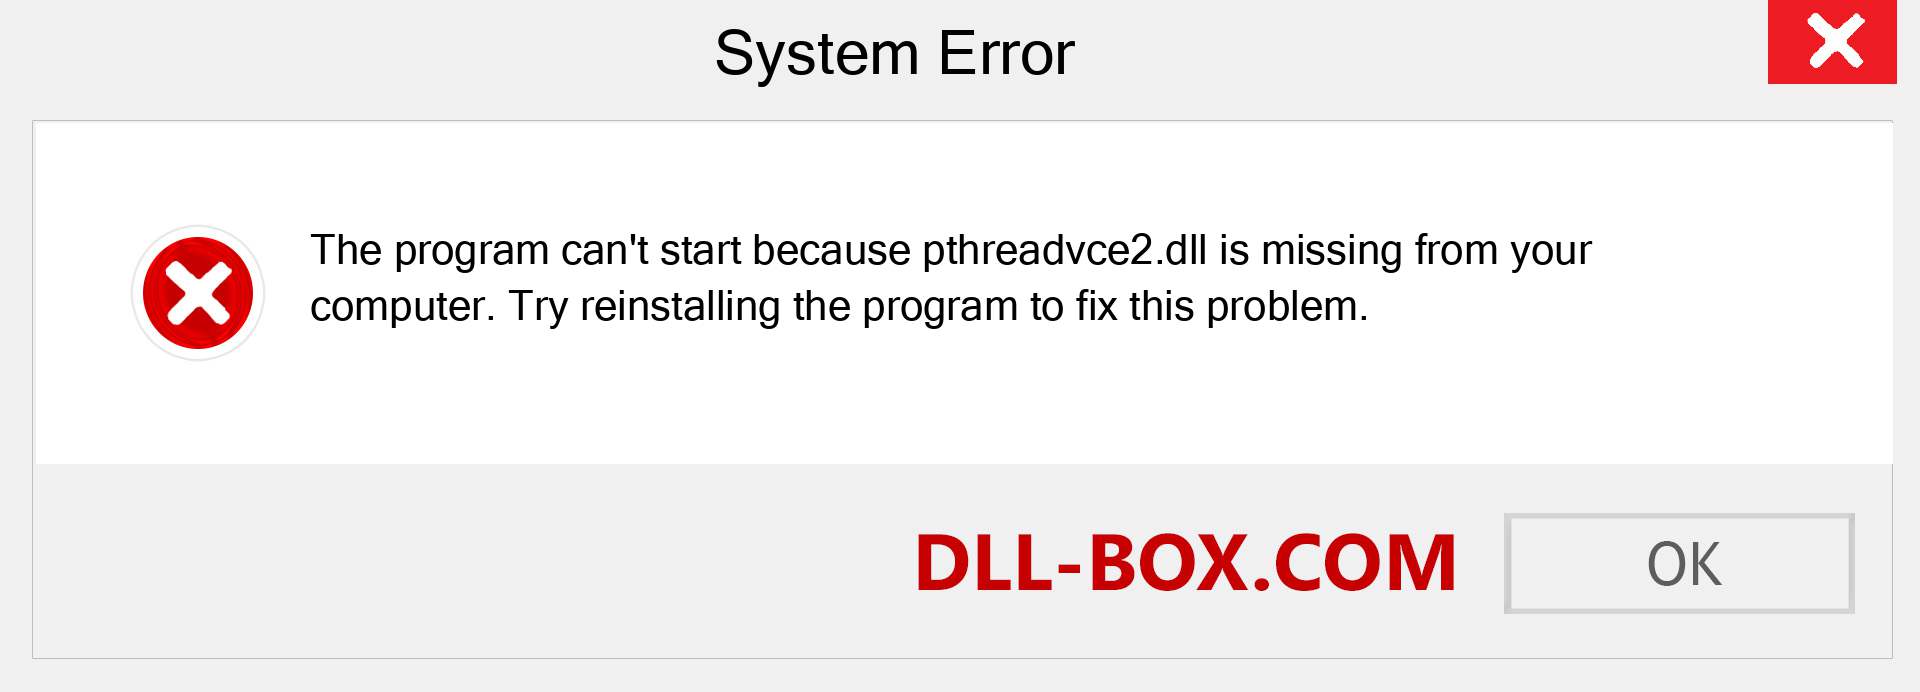  pthreadvce2.dll file is missing?. Download for Windows 7, 8, 10 - Fix  pthreadvce2 dll Missing Error on Windows, photos, images